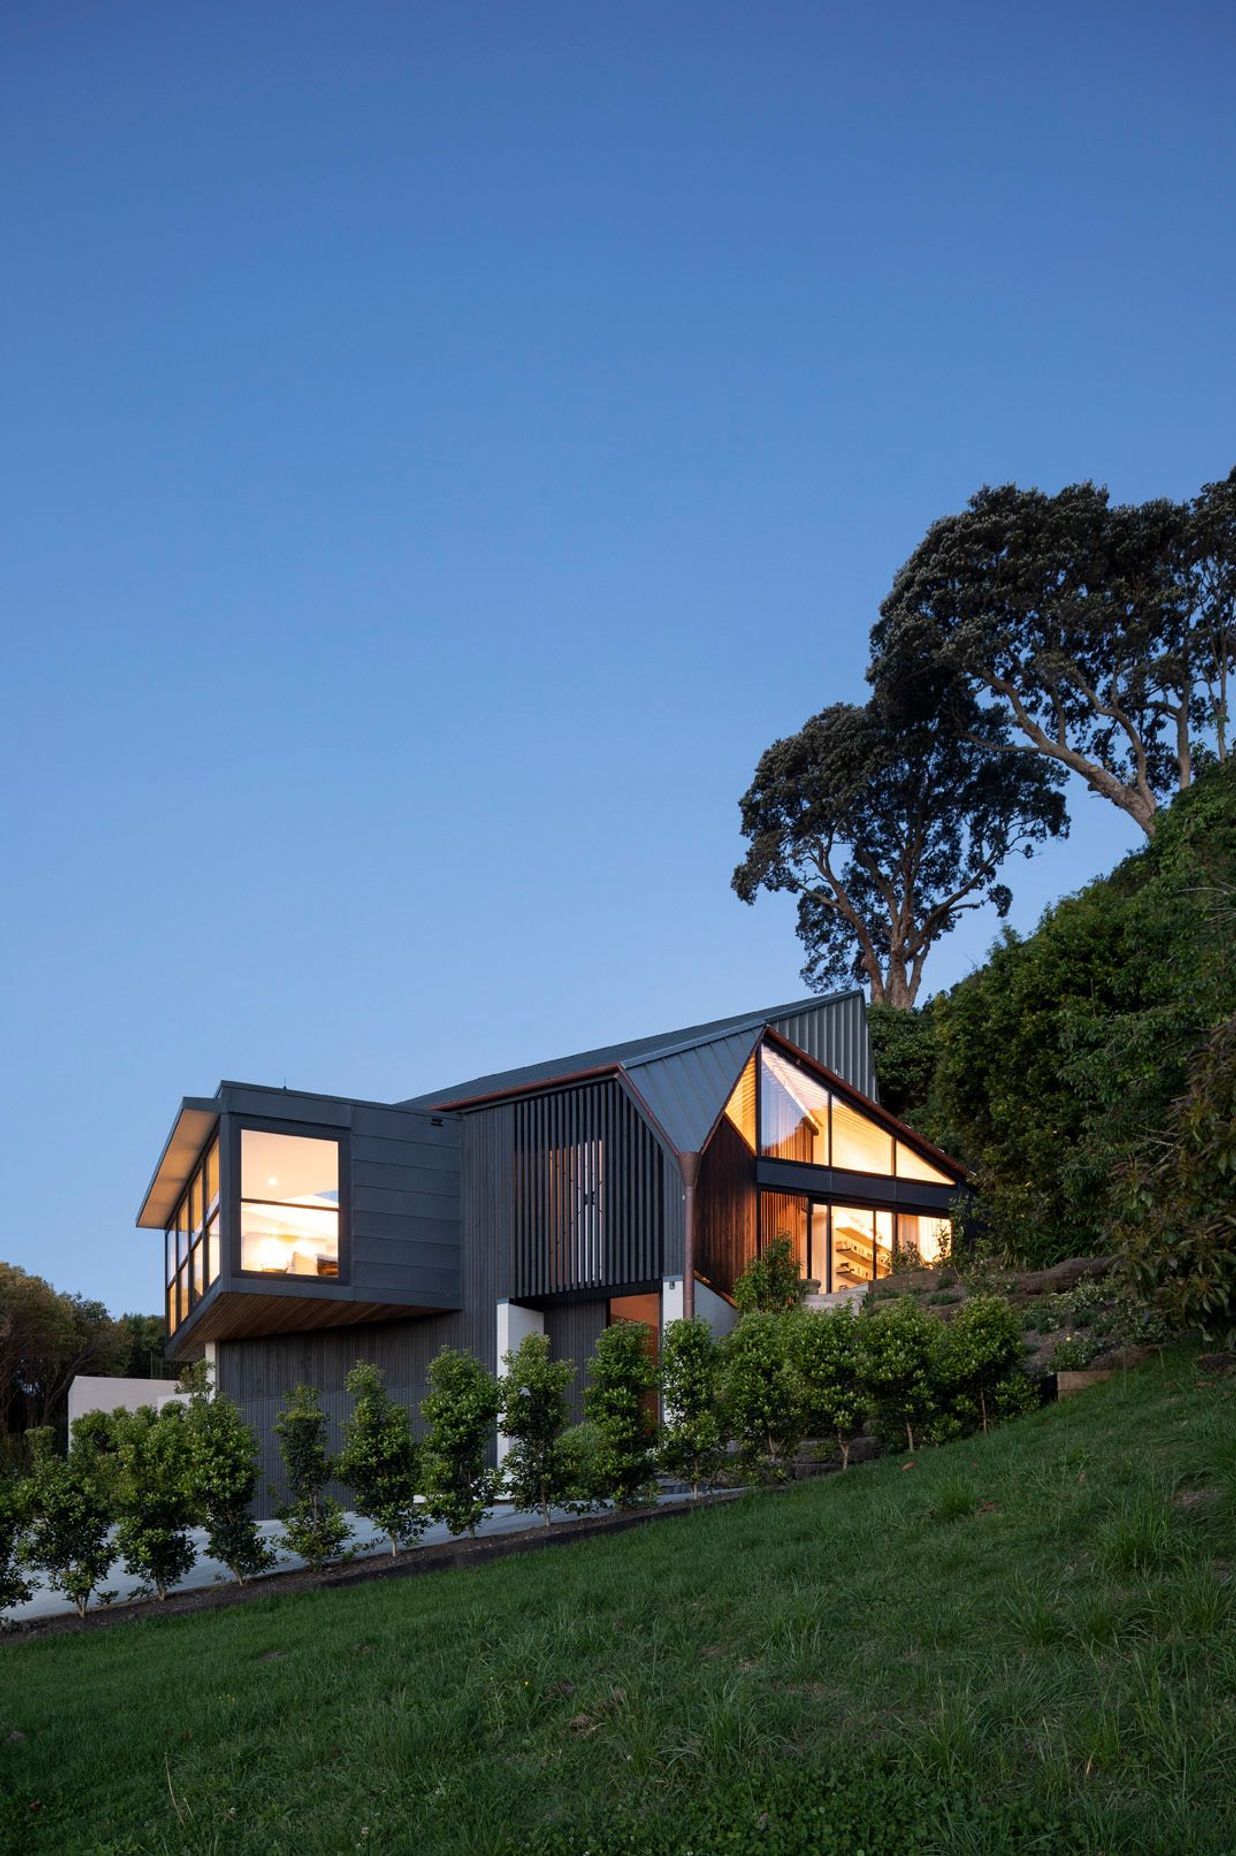 Situated at the end of a 500m driveway, which winds around 12 other houses, the home is perched on the slope of a volcanic crater with views over a wooded dell to the north and Auckland city to the west.